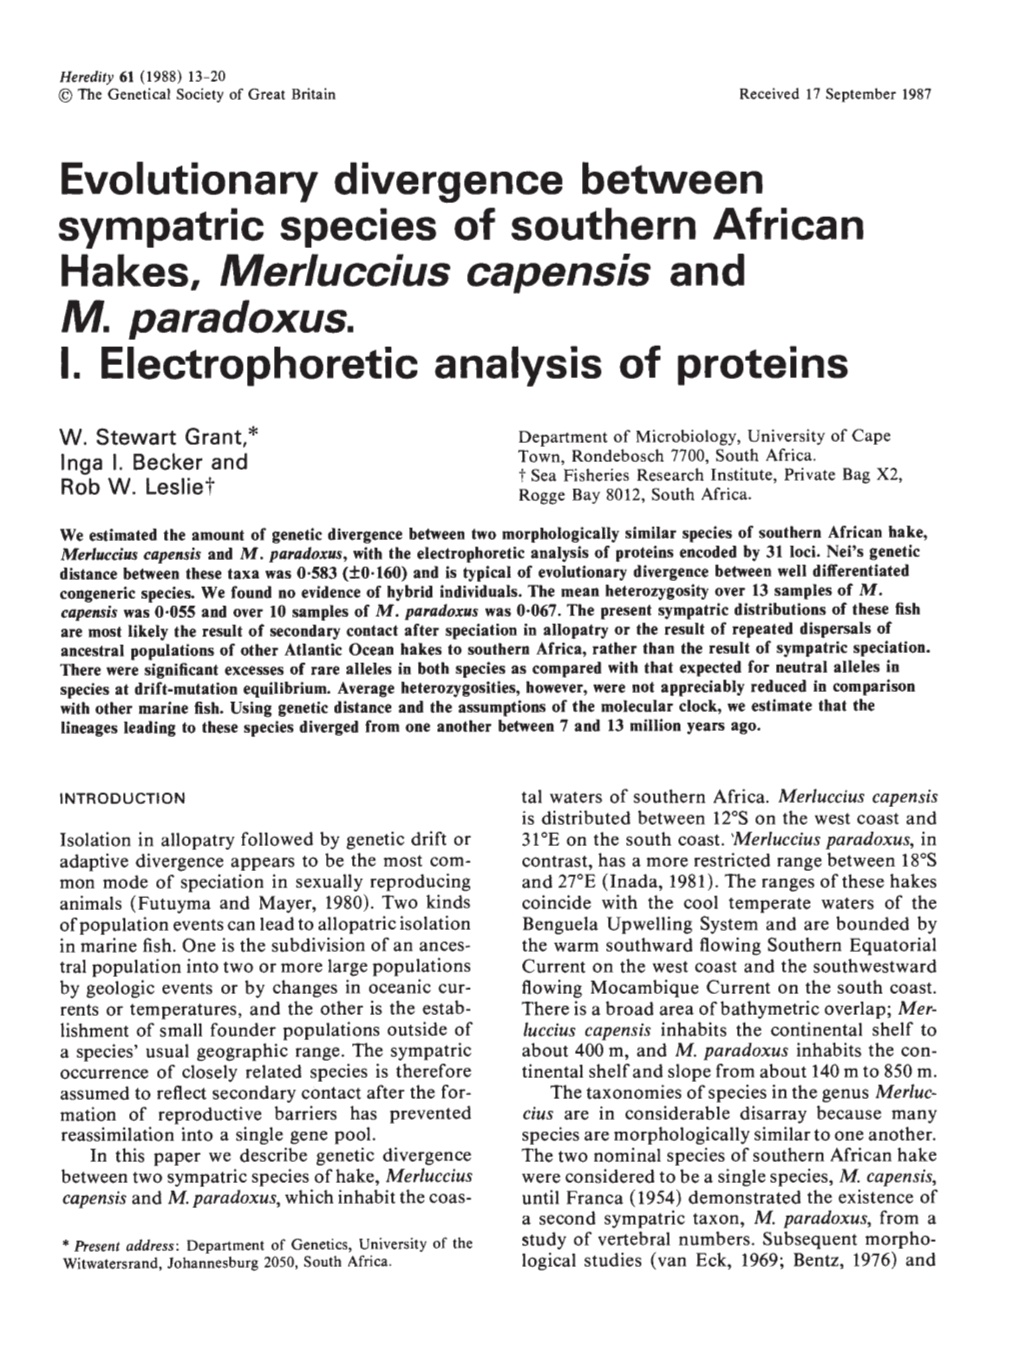 Evolutionary Divergence Between Sympatric Species of Southern African Hakes, Merluccius Capensis and M